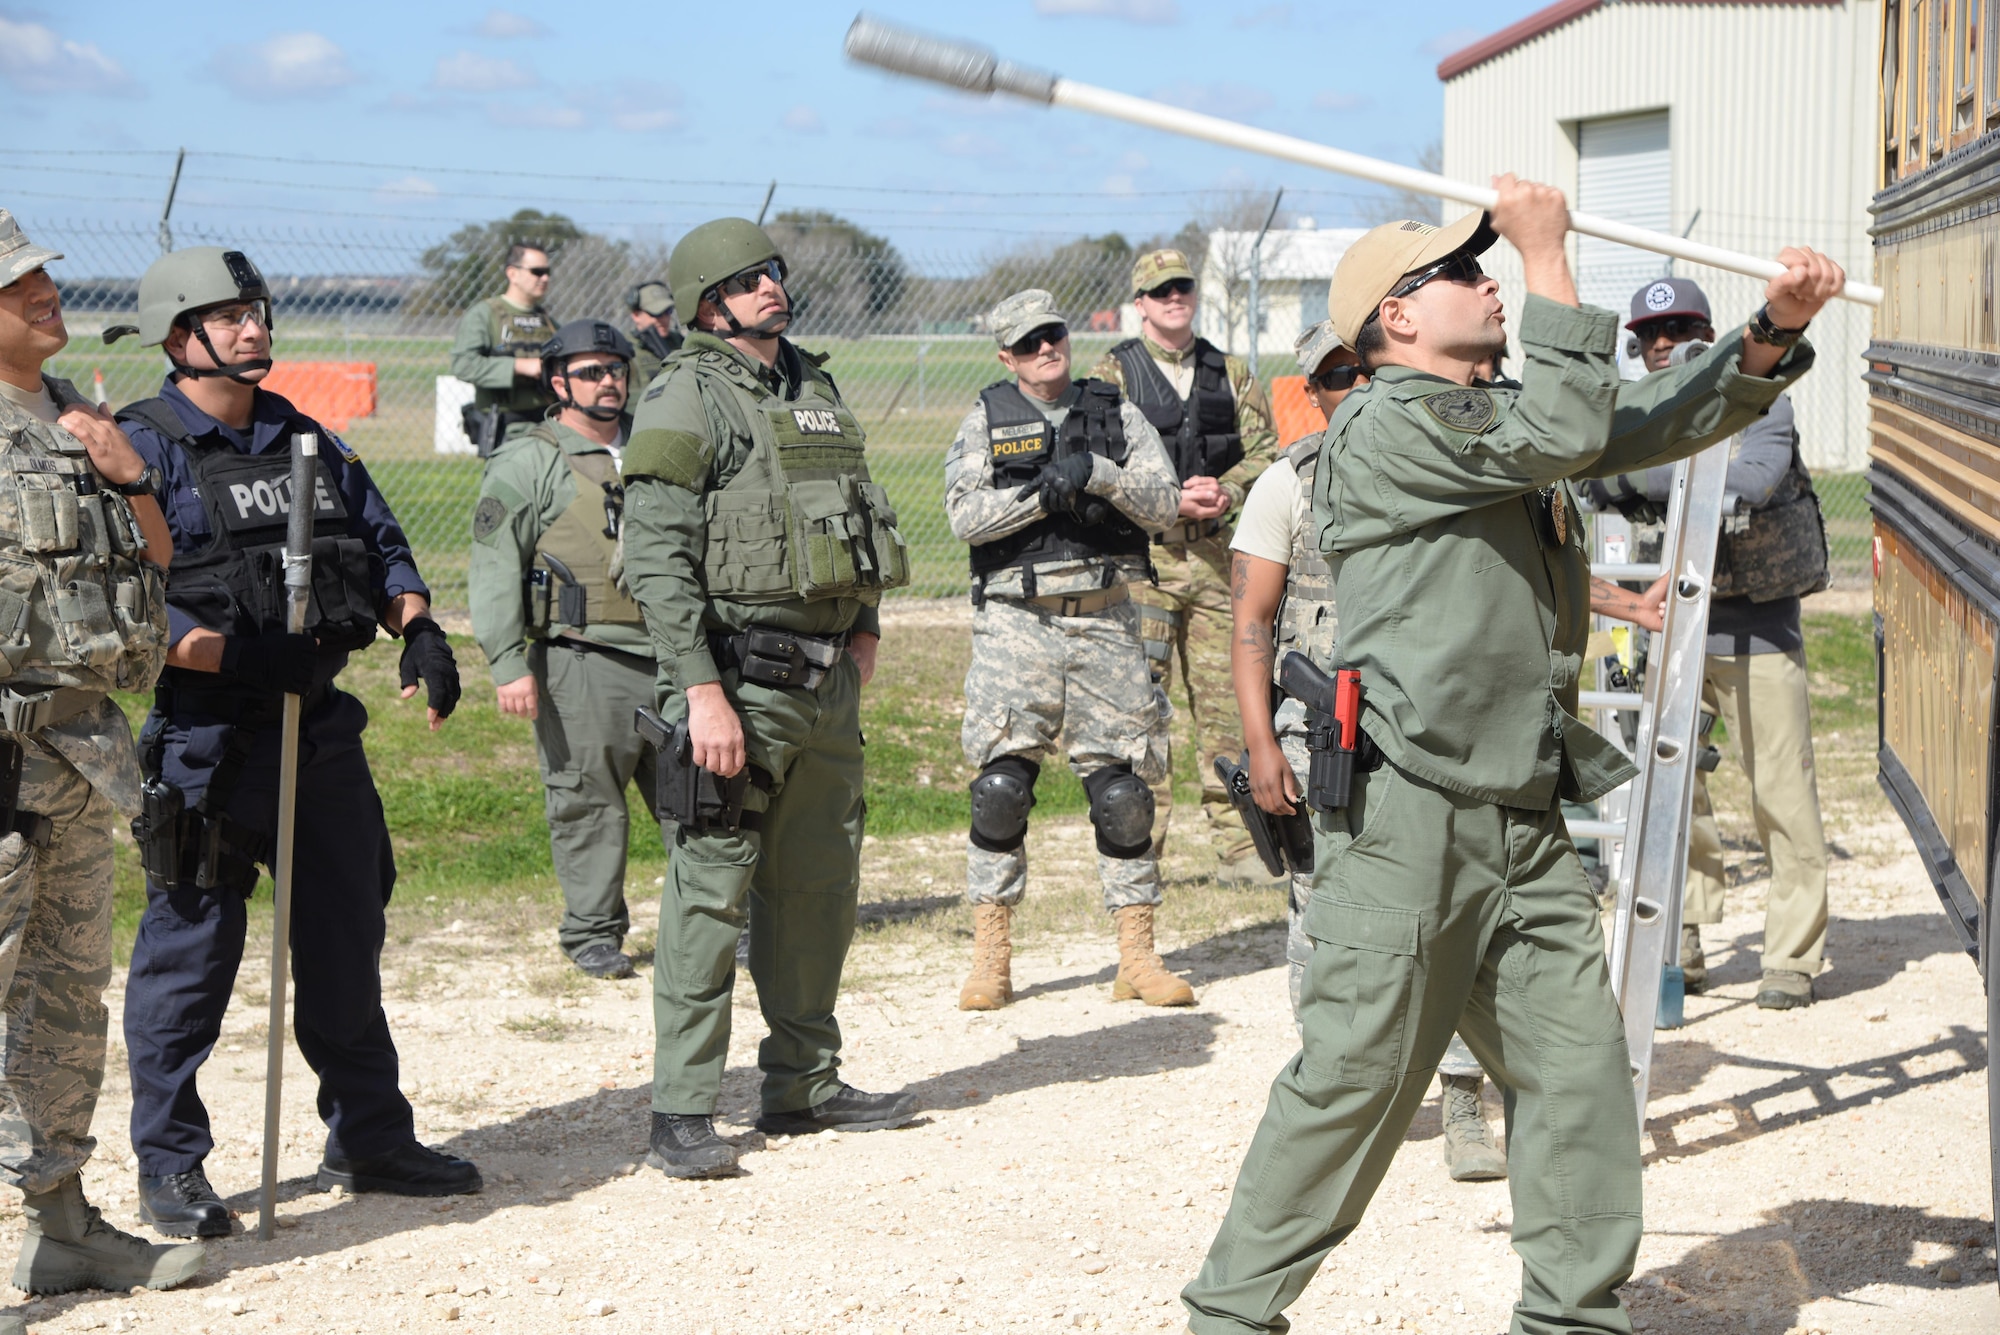 Tech. Sgt. Ruben Morales, 902nd Security Forces Squadron patrolman, demonstrates how to break a bus window during a bus assault and hostage rescue exercise Feb. 19, 2015, at Joint Base San Antonio-Randolph, Texas. The local agencies involved in the exercise were from the cities of Live, Oak Universal City and Converse and the Judson Independent School District Police Departments. Security Forces and local police departments trained together to prepare for emergencies that require both military and civilian response efforts. (U.S. Air Force photo by Airman 1st Class Stormy Archer)